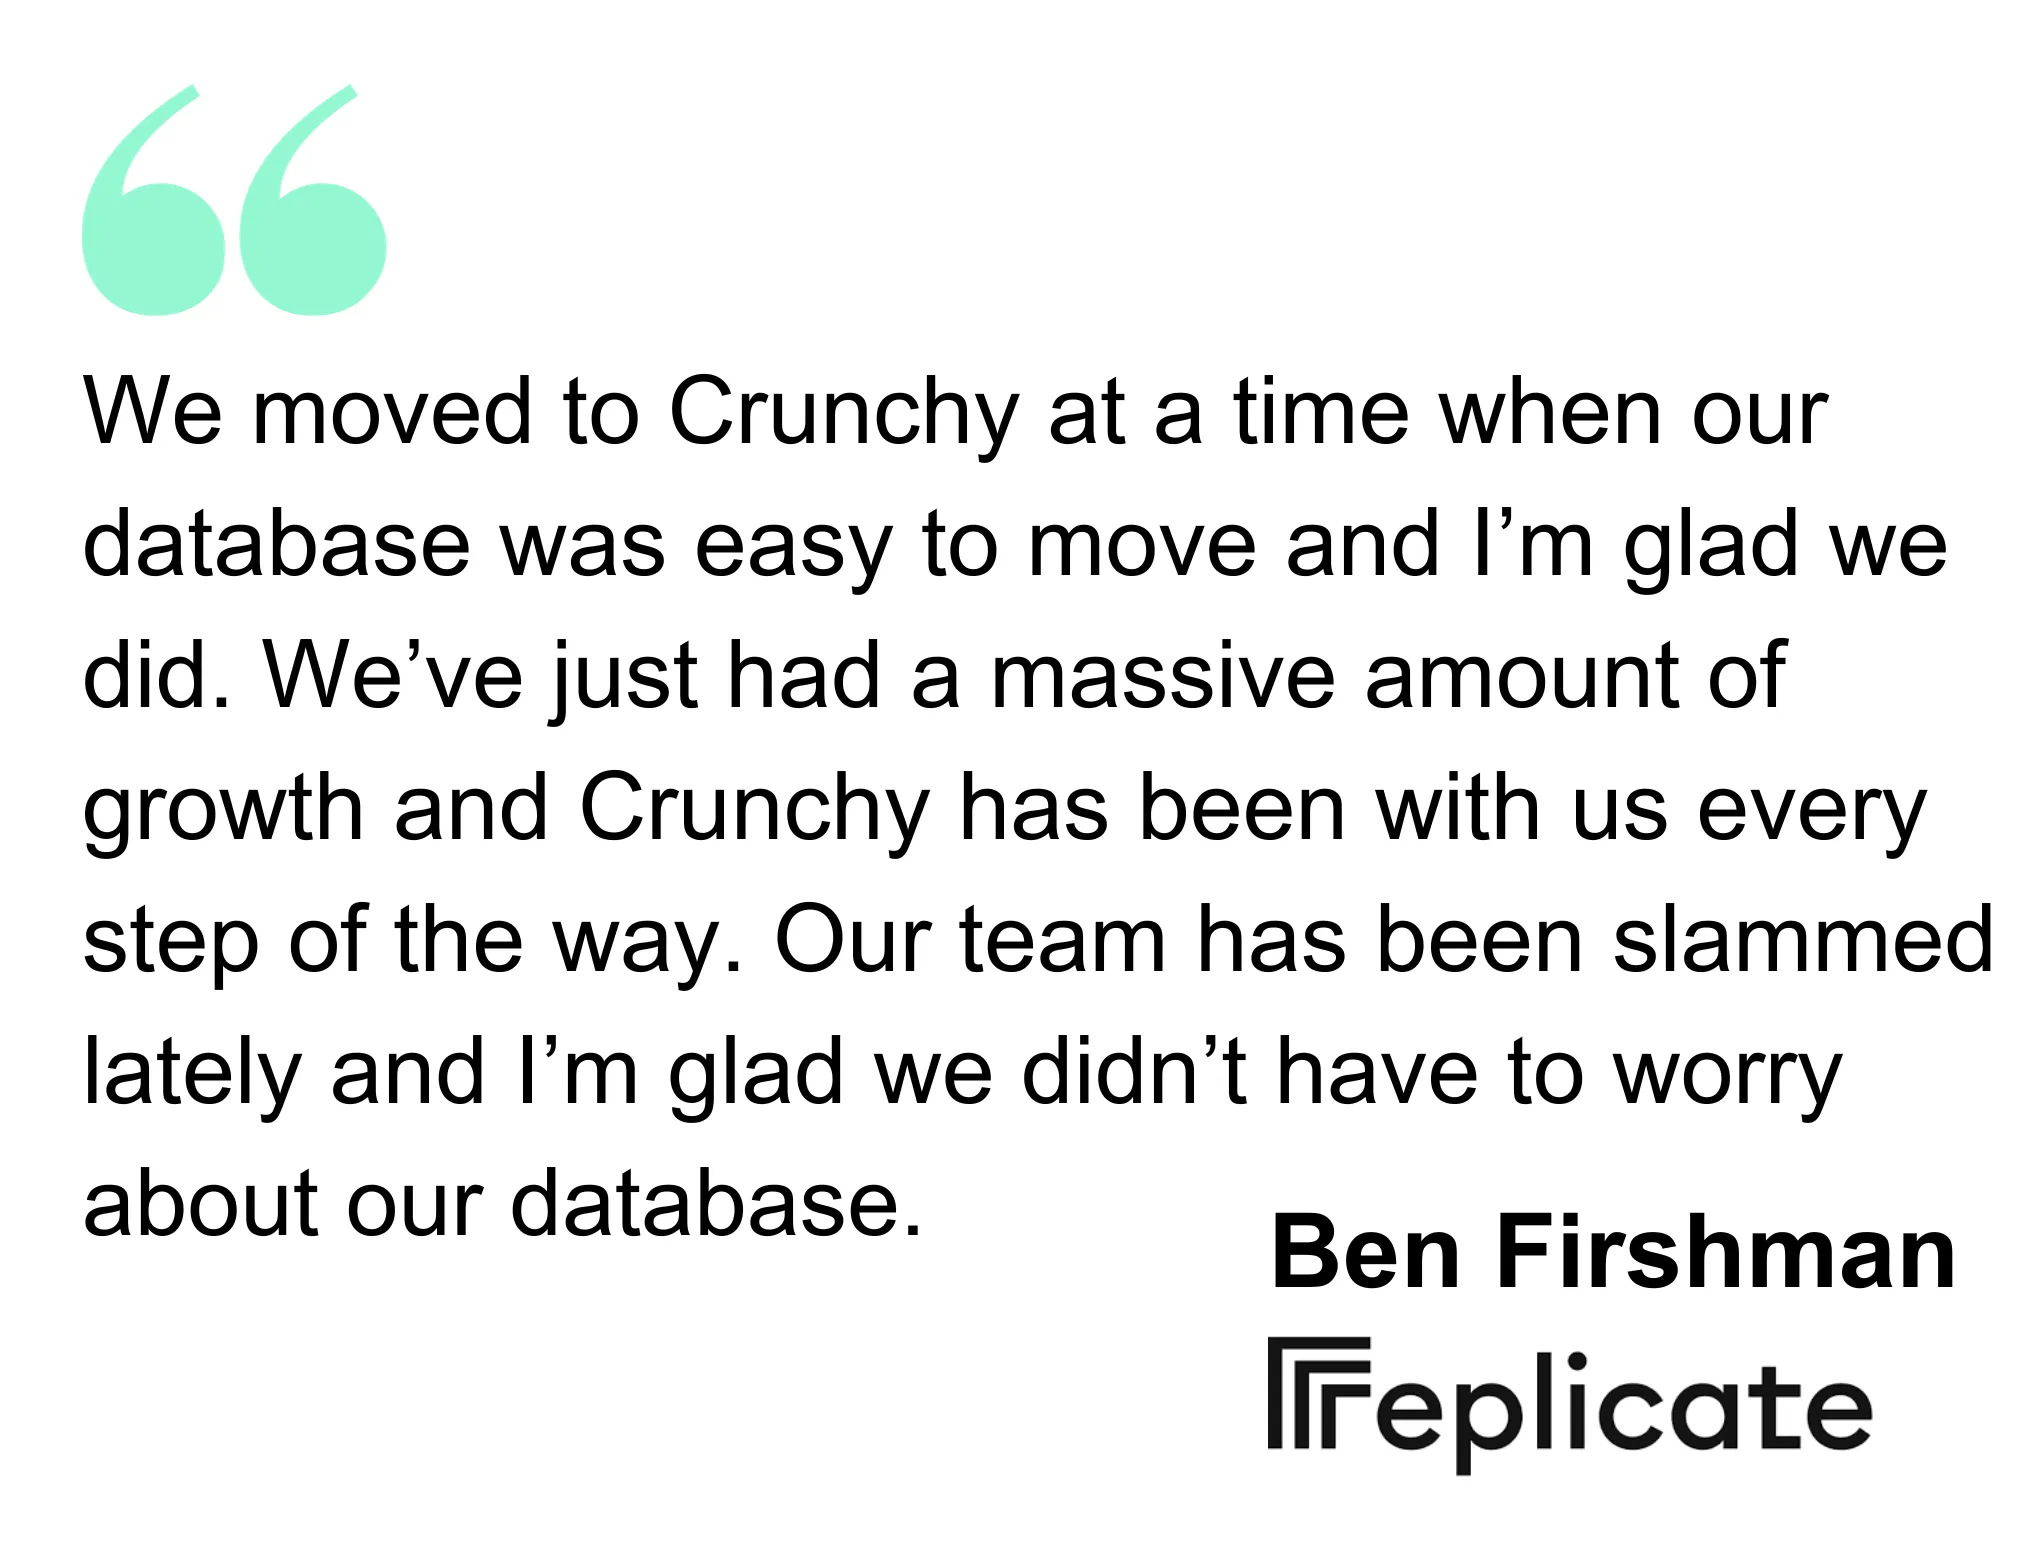 Replicate quote, We moved to Crunchy at a time when our database was easy to move and I’m glad we did. We’ve just had a massive amount of growth and Crunchy has been with us every step of the way. Our team has been slammed lately and I’m glad we didn’t have to worry about our database.